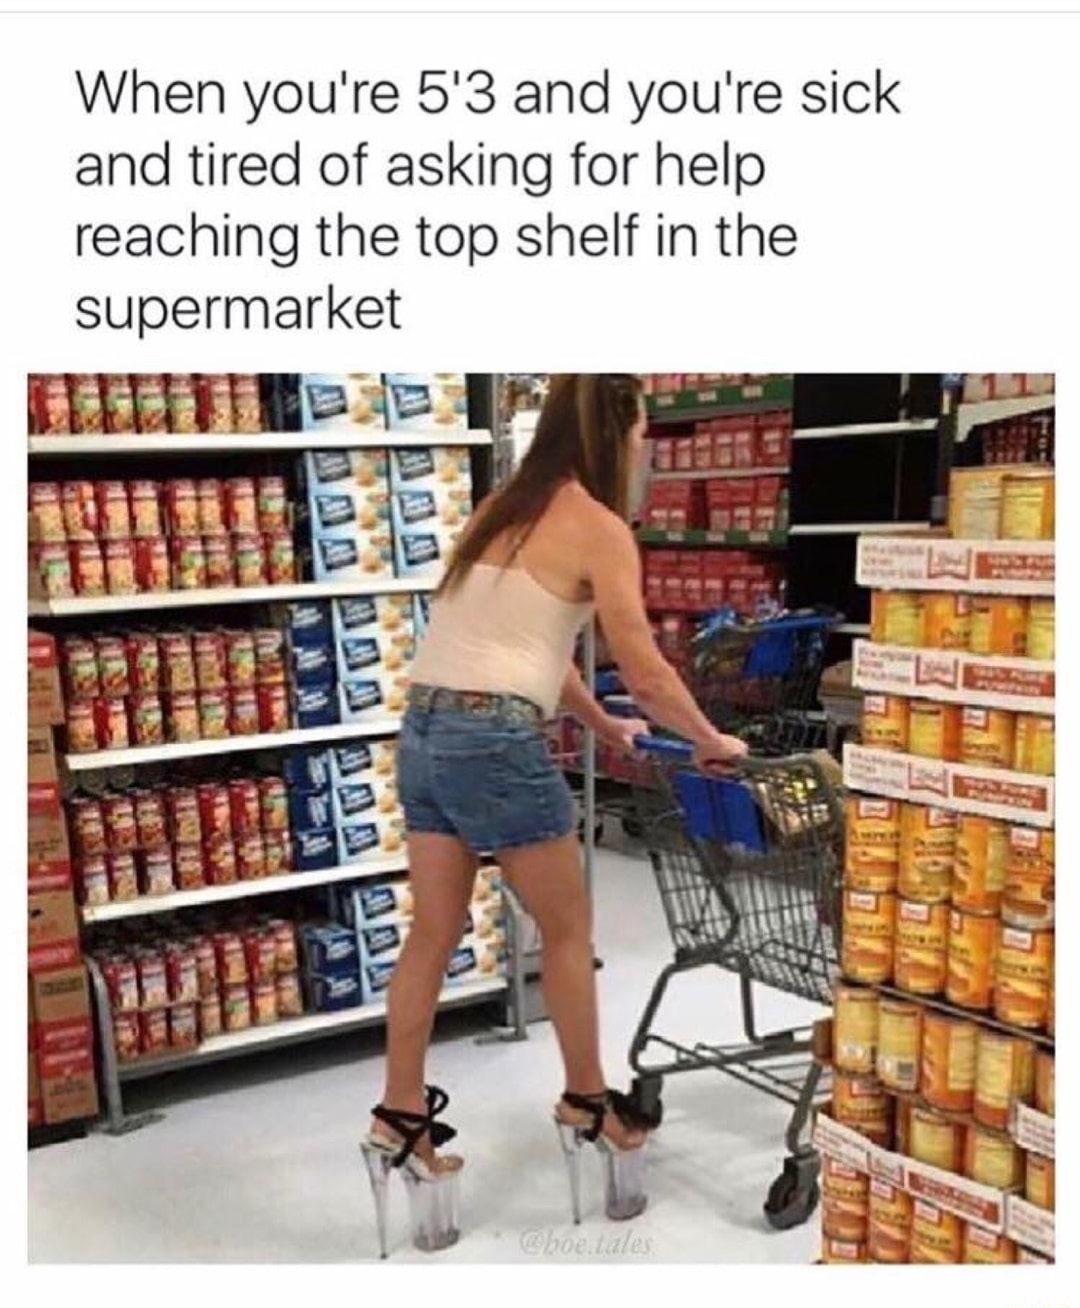 supermarket - When you're 5'3 and you're sick and tired of asking for help reaching the top shelf in the supermarket hoe vales